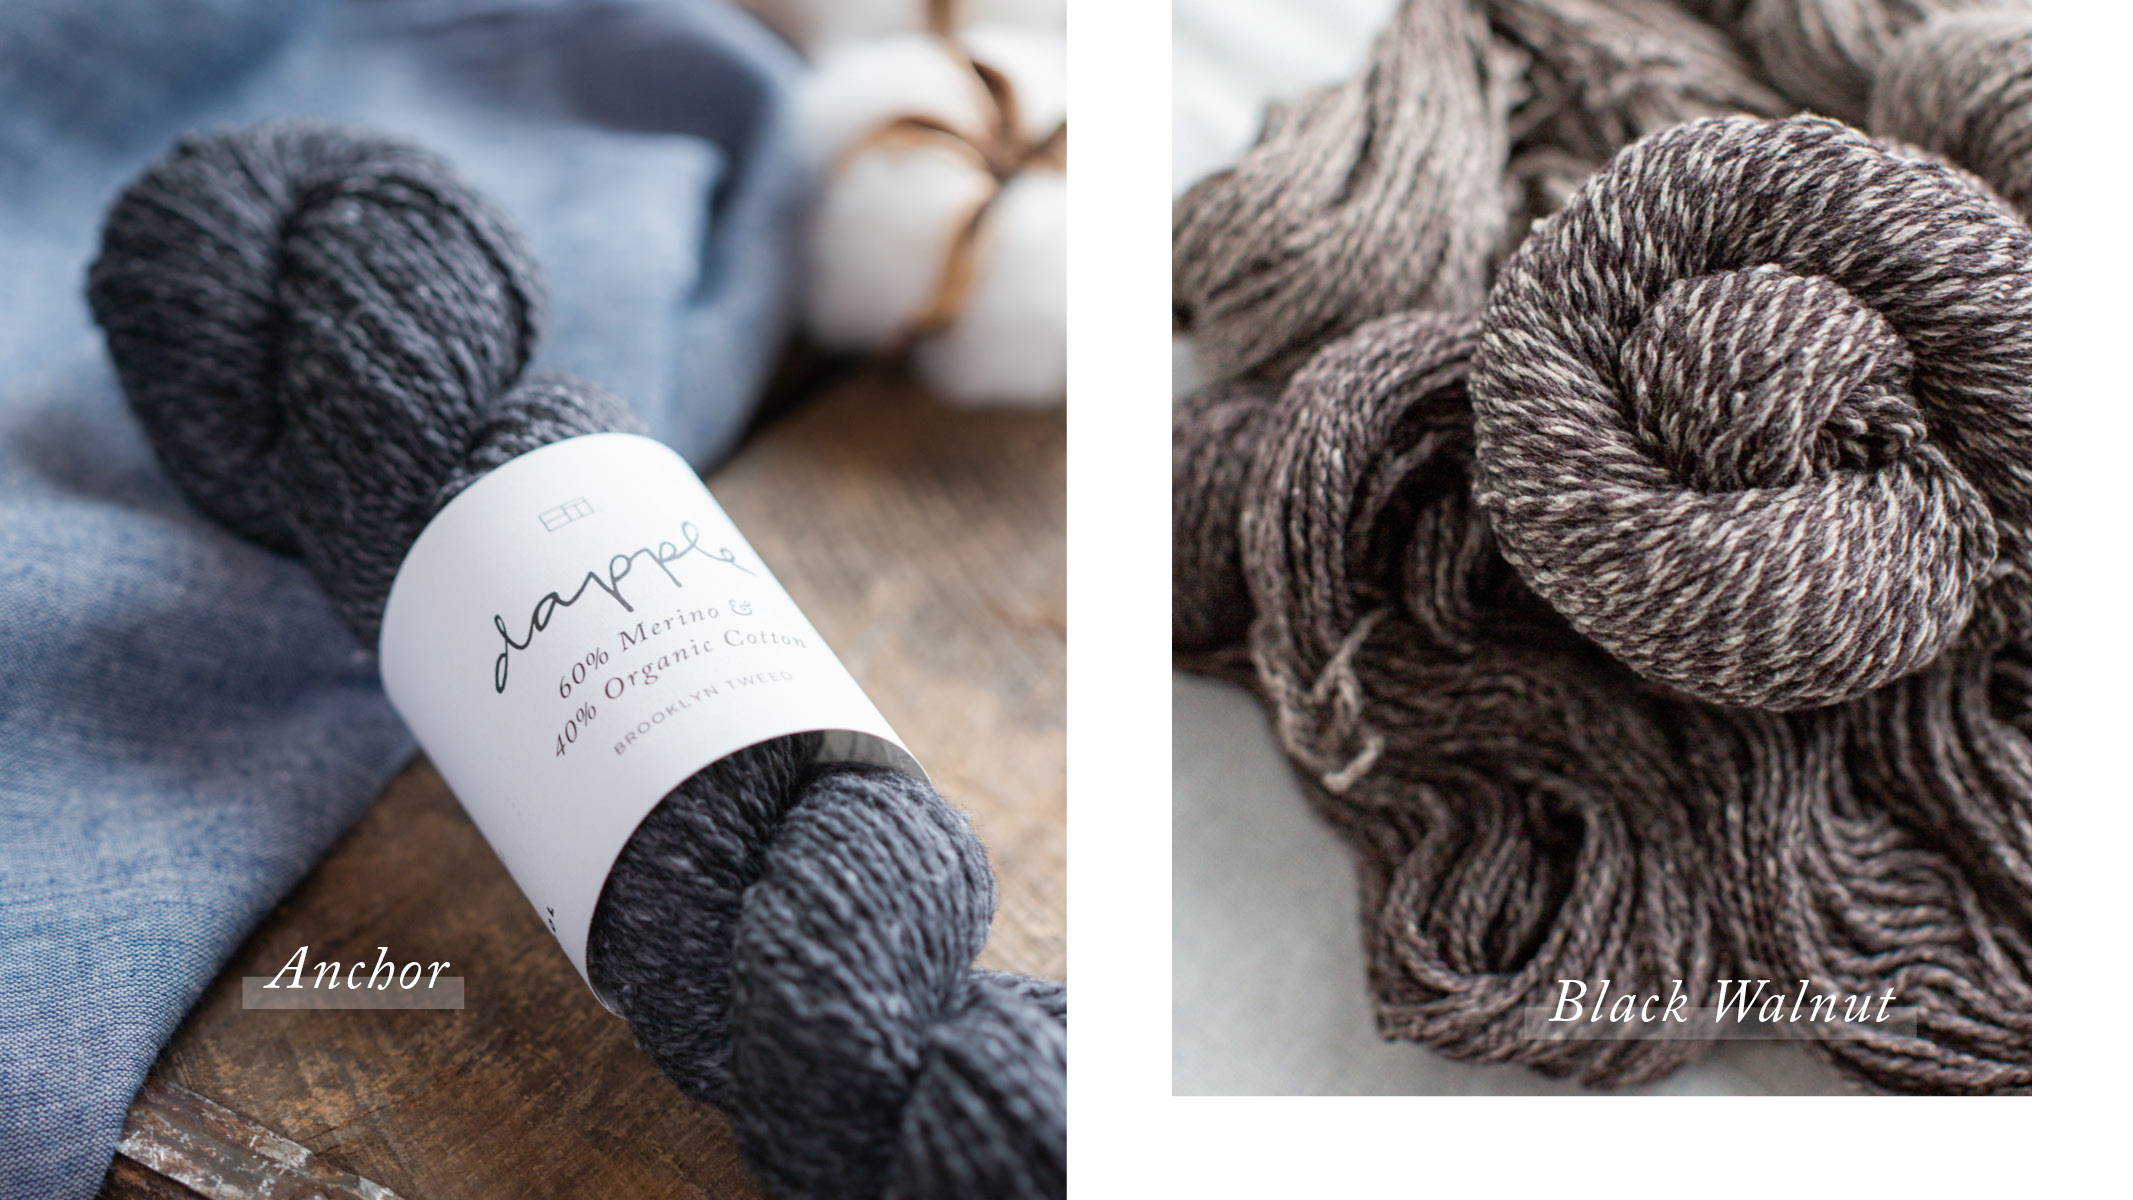 Right: one marled skein swirl of Dapple Black Walnut sits on a pile of loose yarn. Left: Single skein of Dapple Anchor with ball band/label sitting on a wooden box with blue linen fabric and a cotton flower.